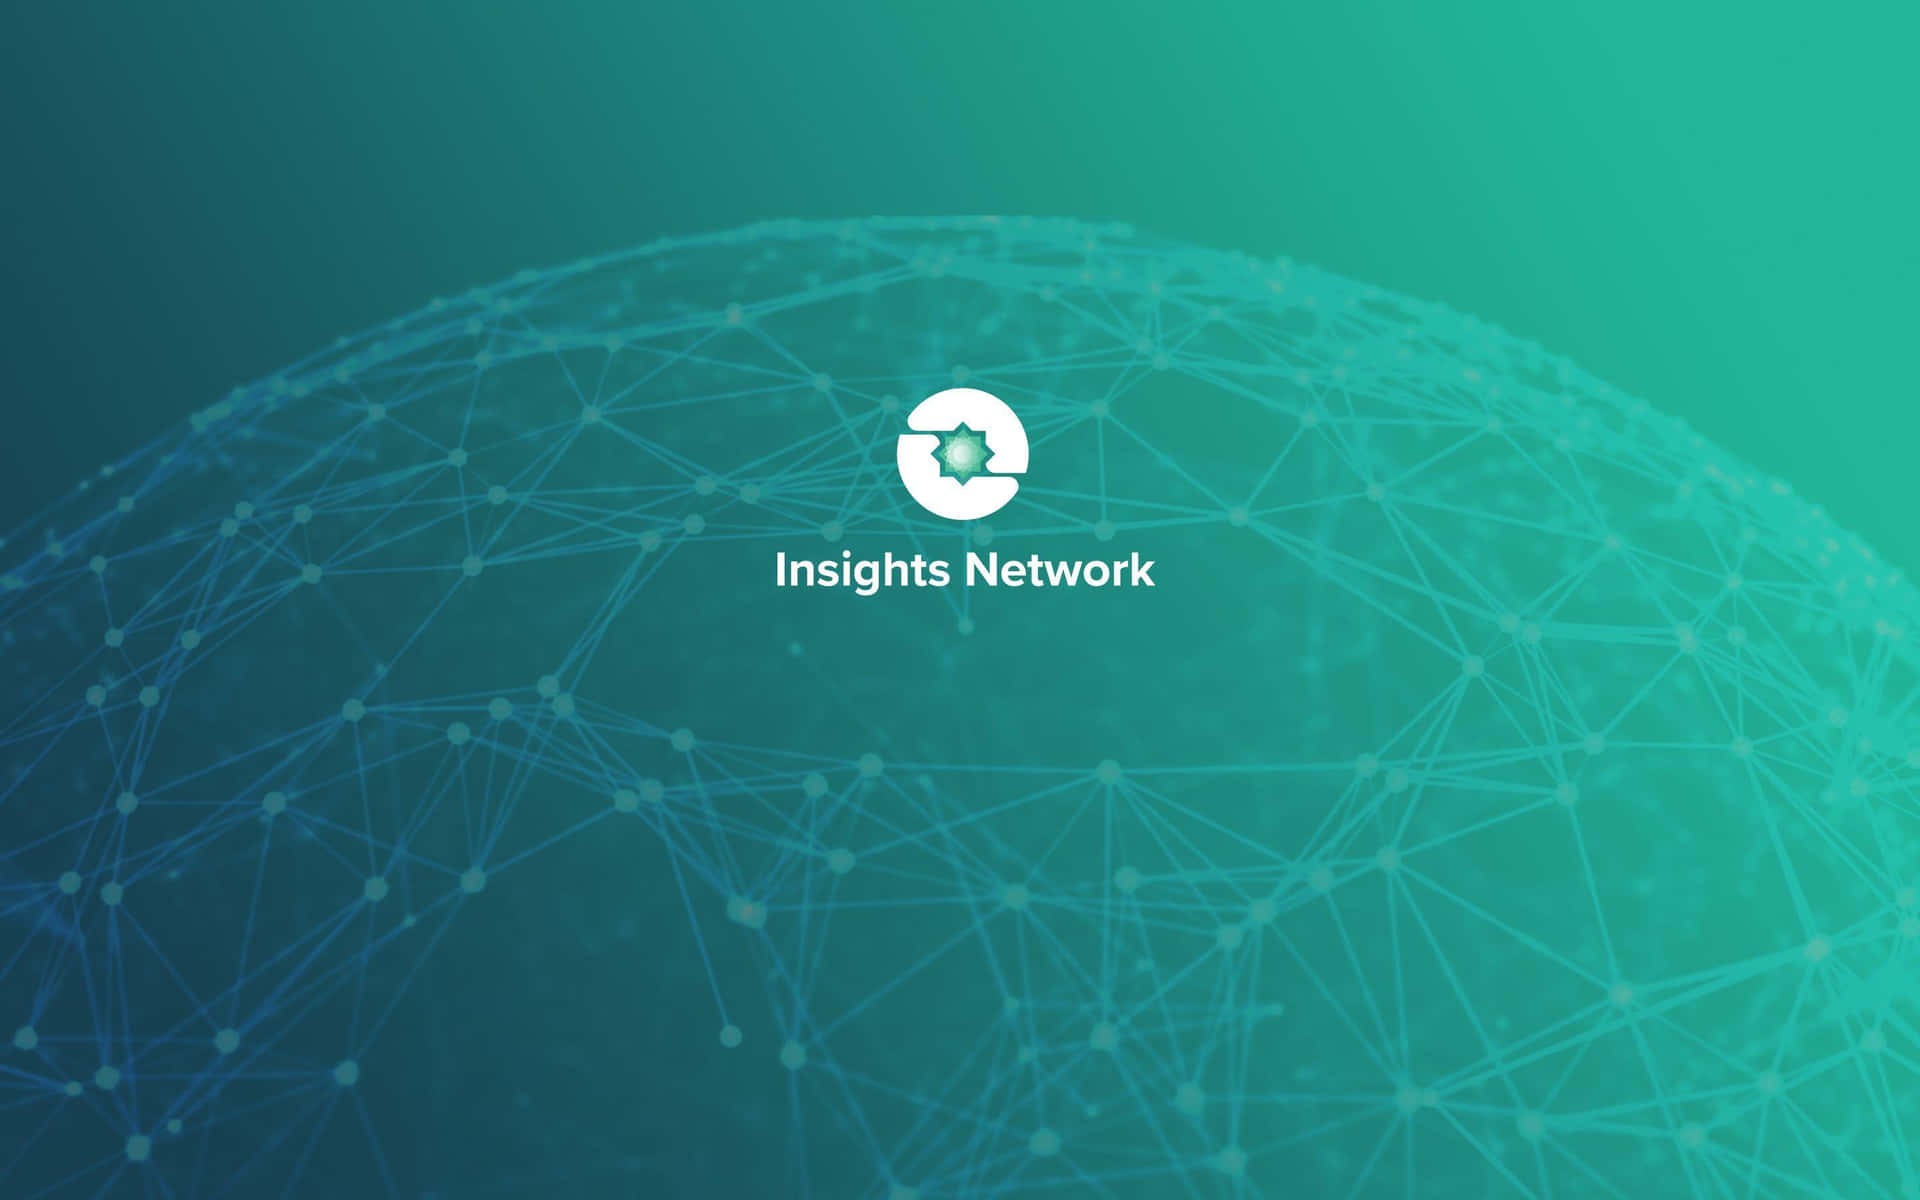 Insights Network Global Connectivity Background